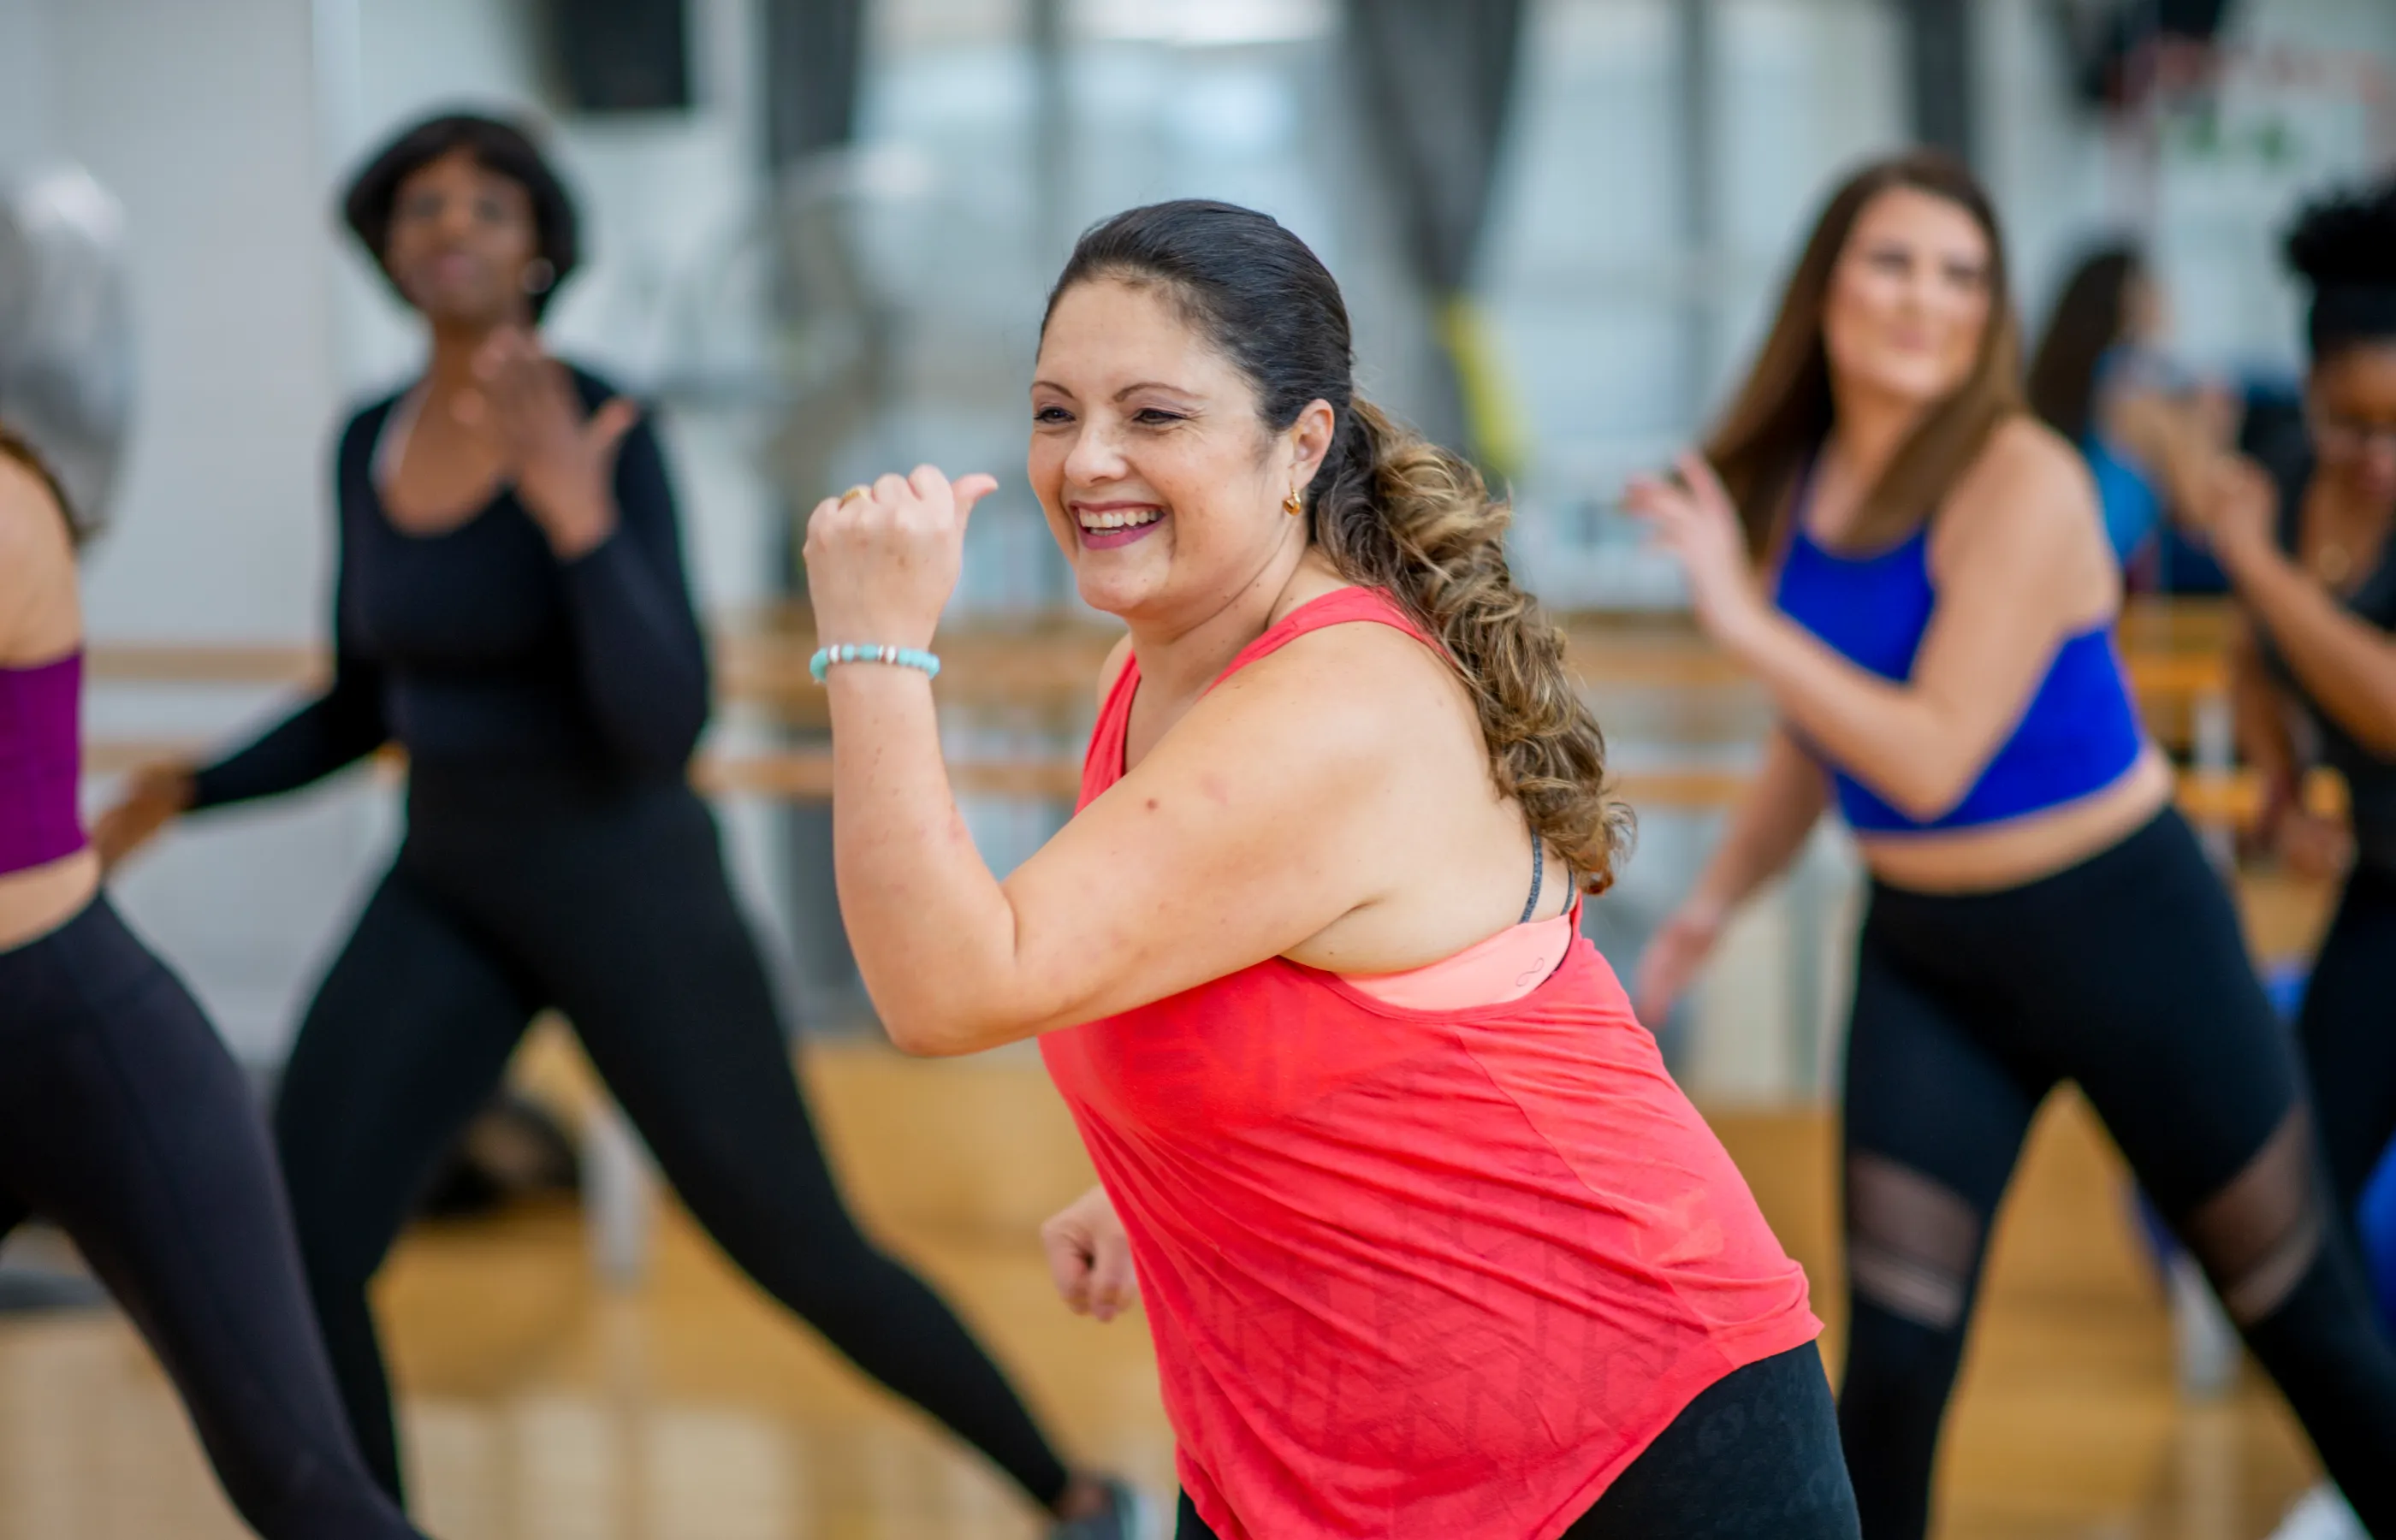  Group of women participating in a fitness dance class